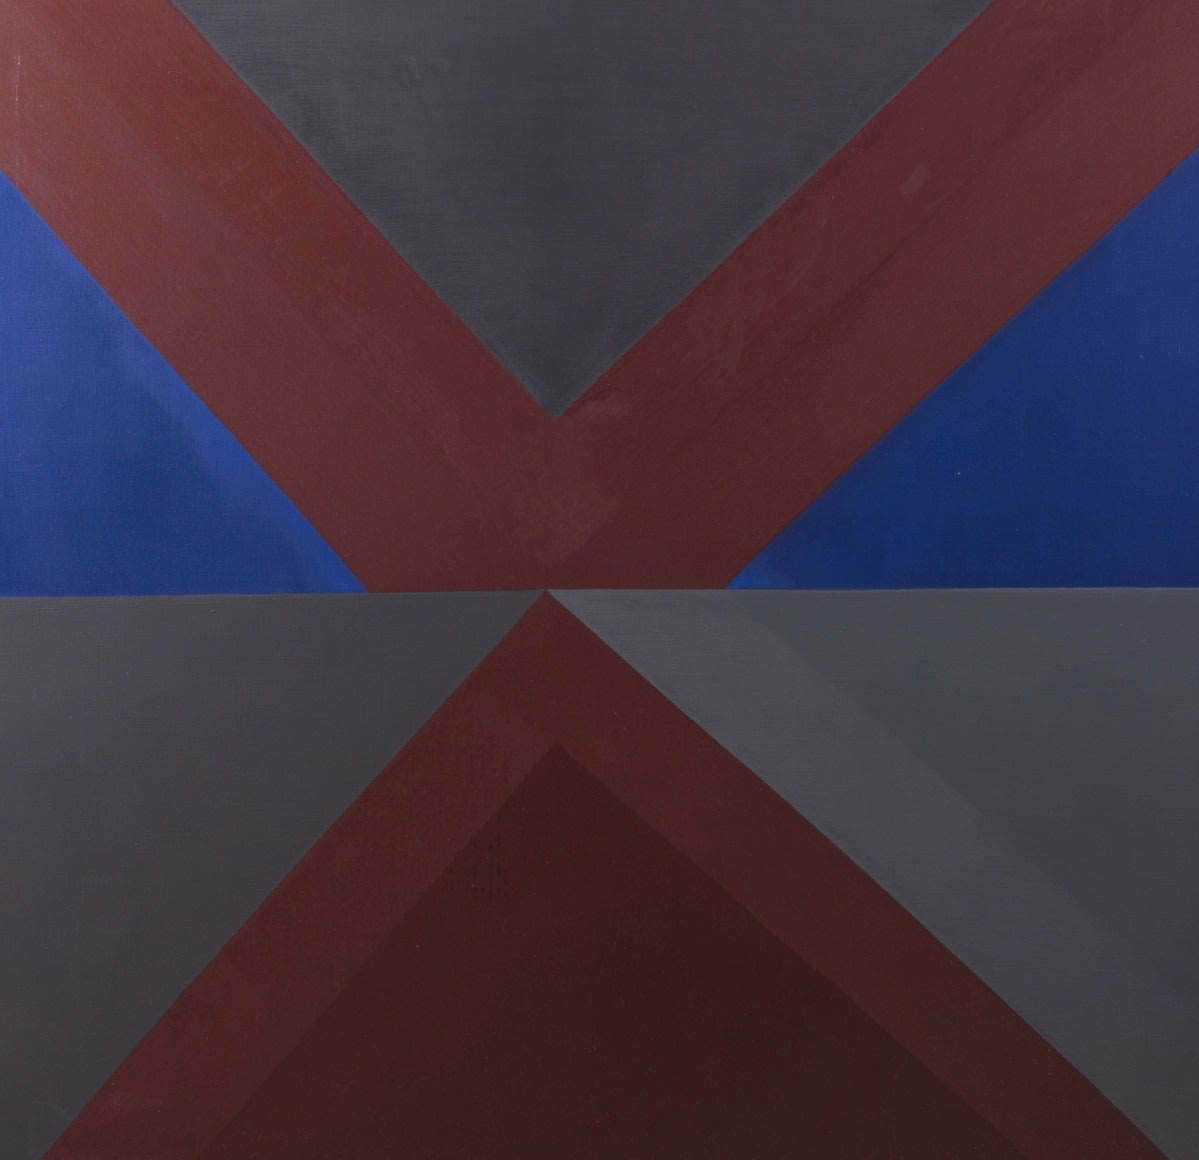 Felrath Hines, Untitled #2, 1978, Oil on canvas, 46 x 48 inches. Canvas divided horizontally with red, blue and grey geometric triangles and shapes. Felrath Hines worked to create universal visual idioms from a place of complex personal experience. His figurative and cubist-style artwork morphed into soft-edged organic abstracts as he grappled with hues in his chosen oil medium.